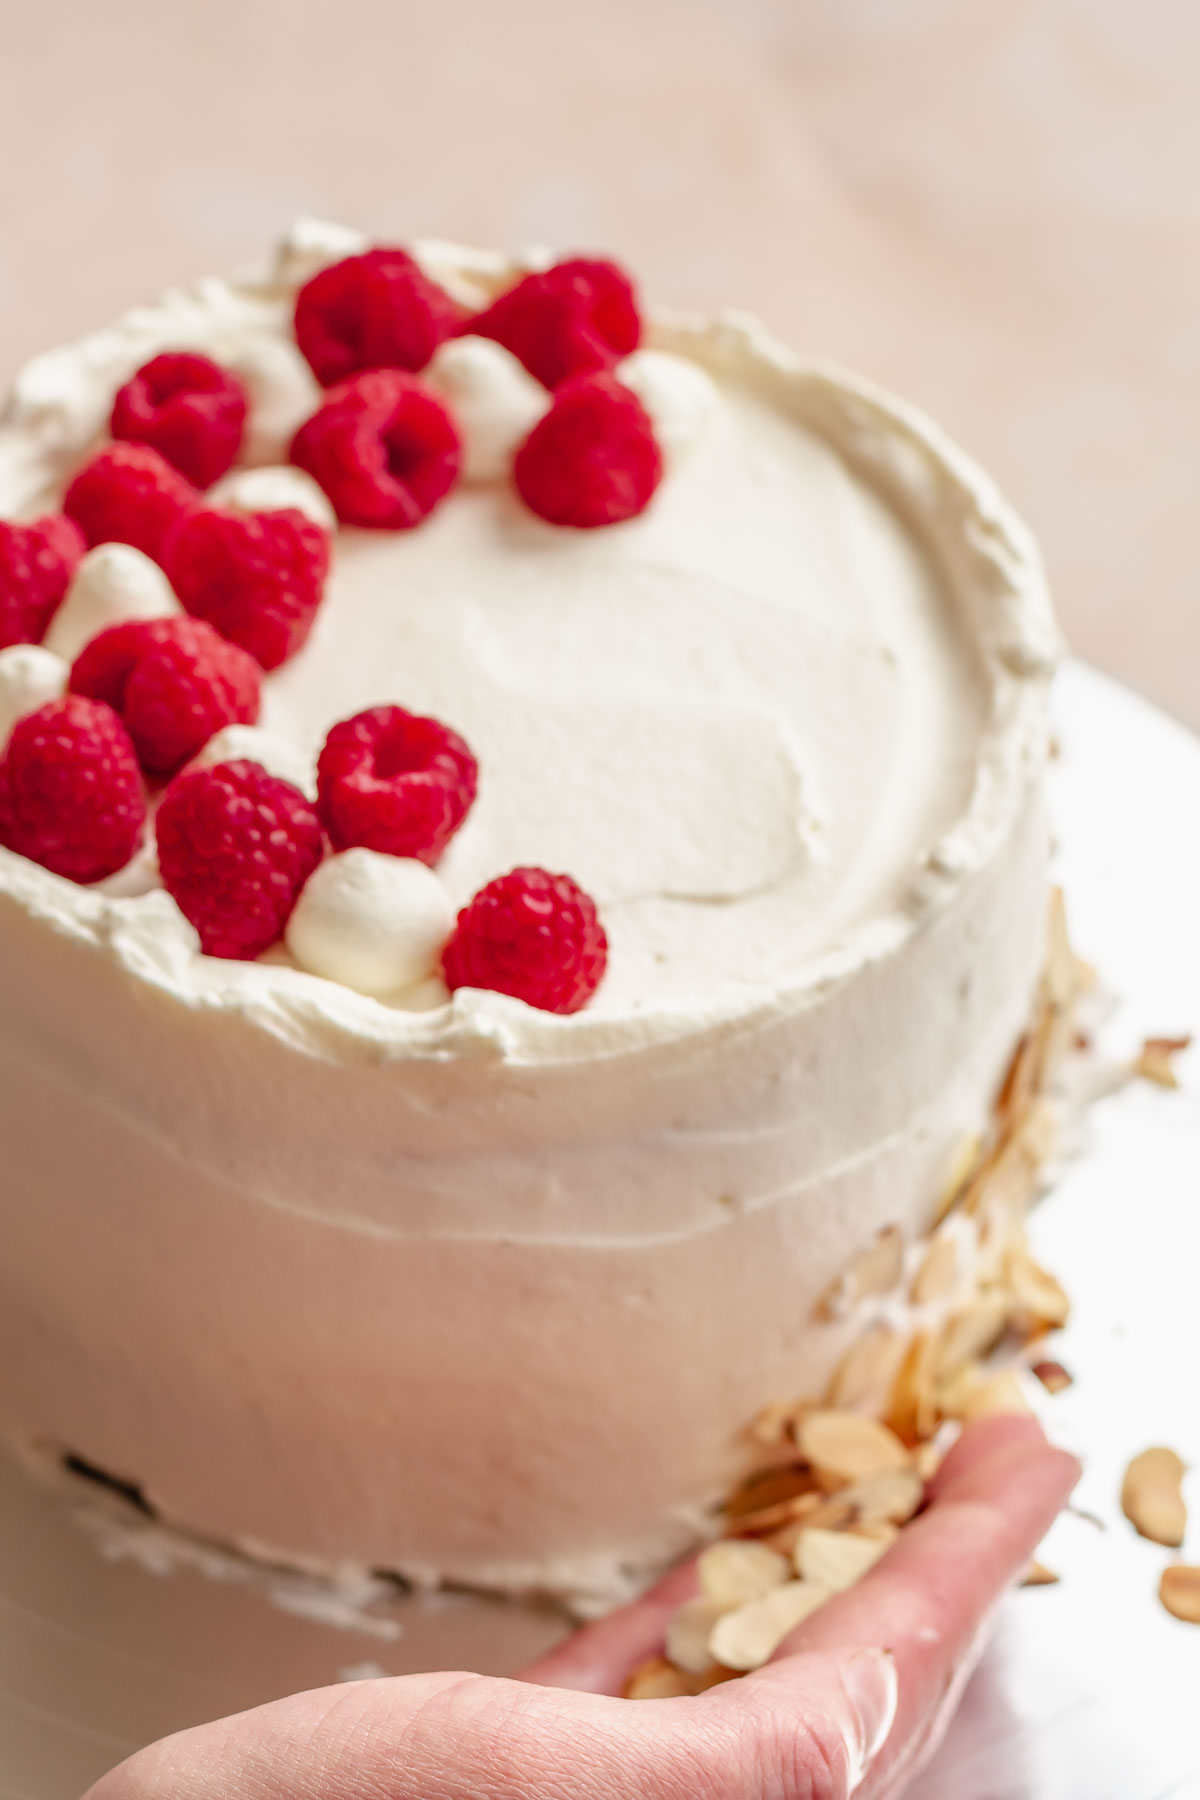 A hand presses sliced almonds onto the base of the cake and raspberries are on top.